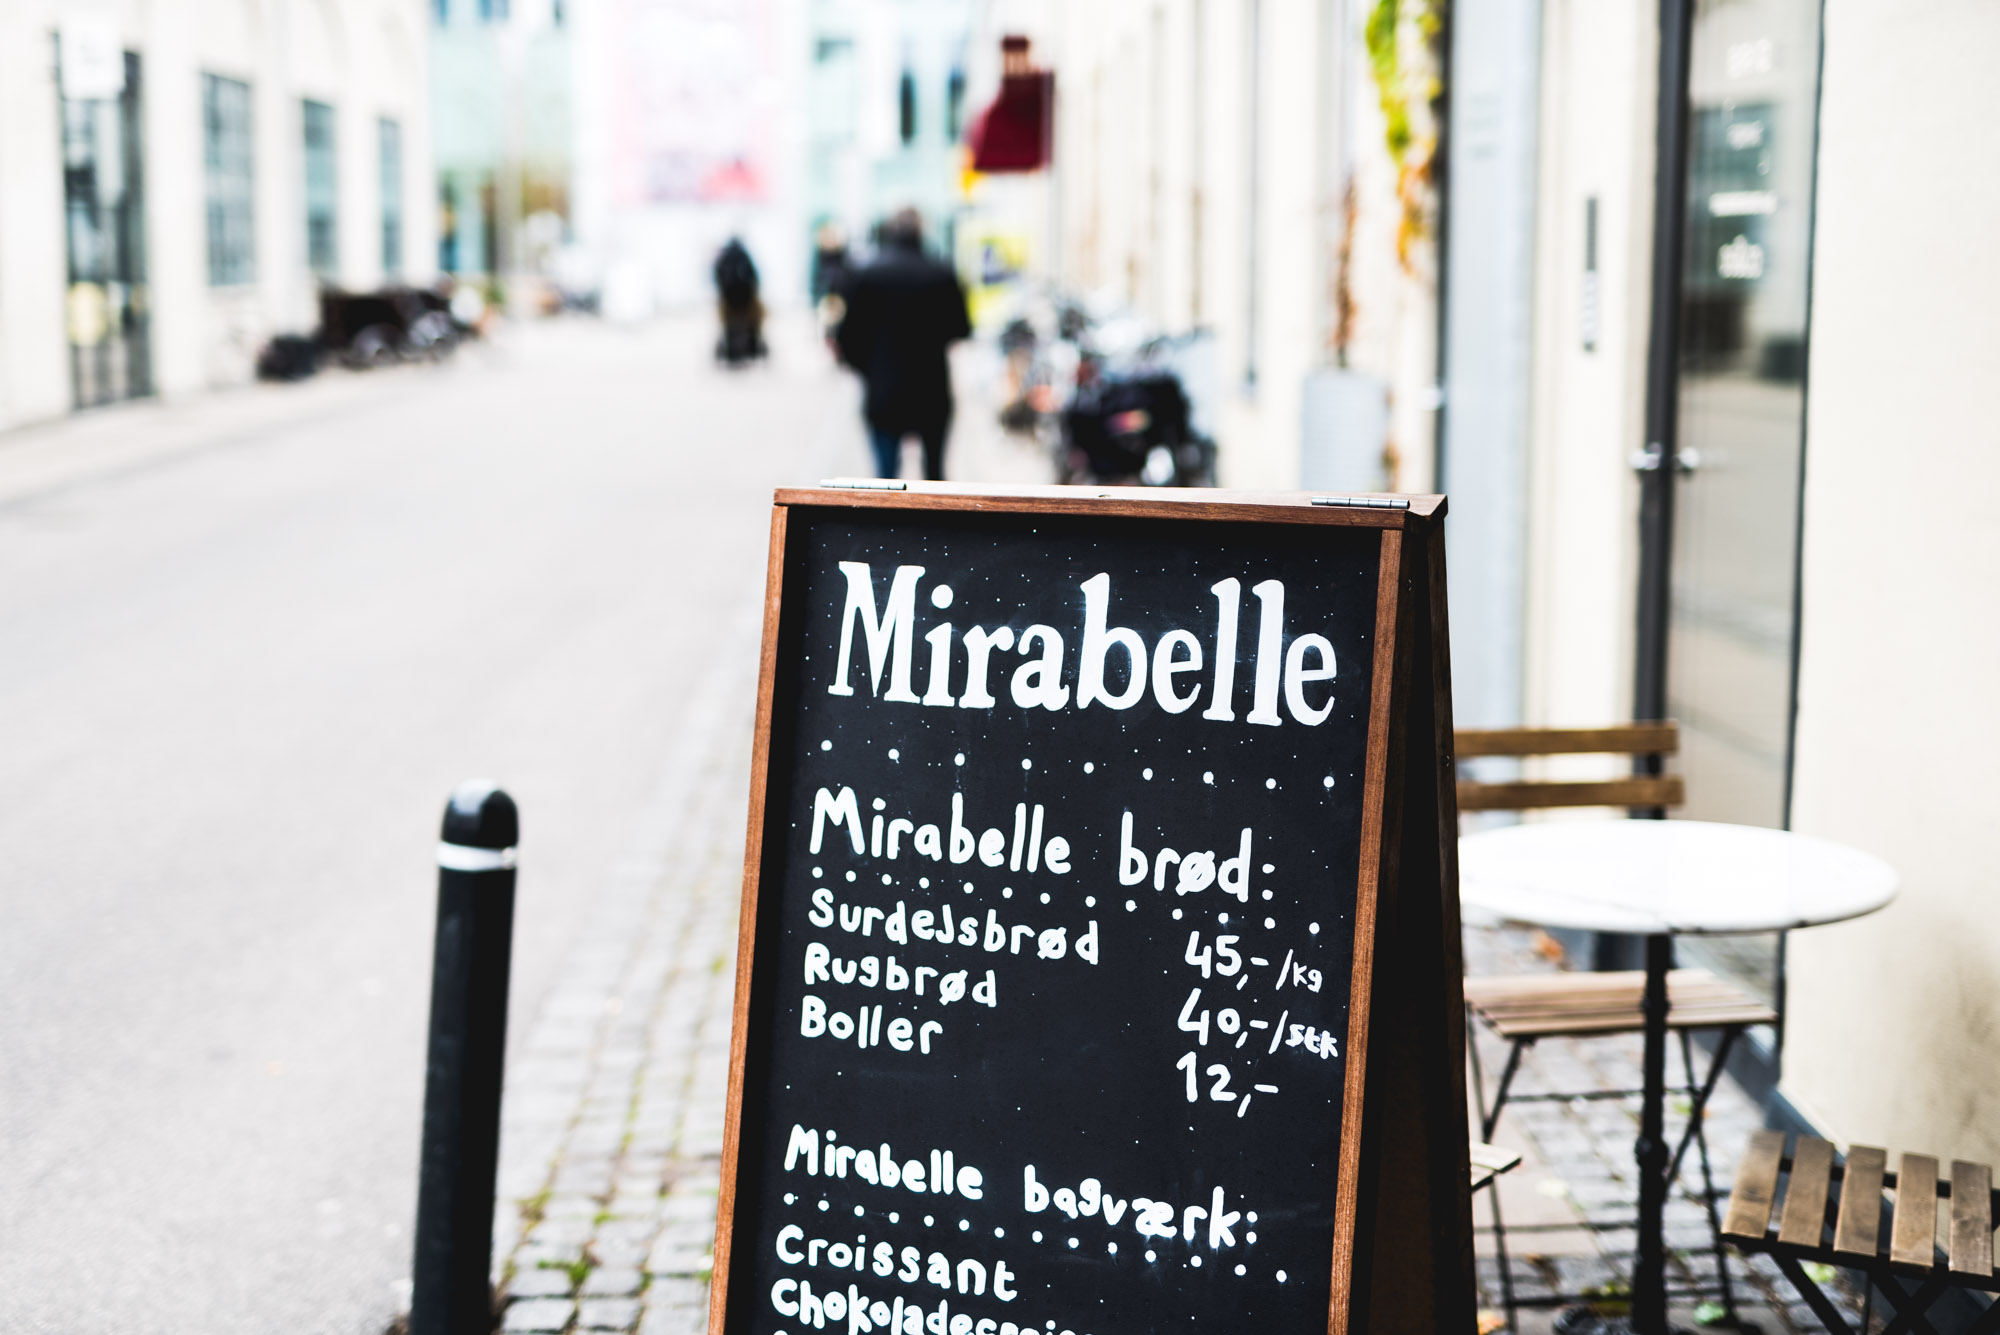 Jeff On The Road - Copenhagen - Food - Mirabelle - All photos are under Copyright © 2017 Jeff Frenette Photography / dezjeff. To use the photos, please contact me at dezjeff@me.com.